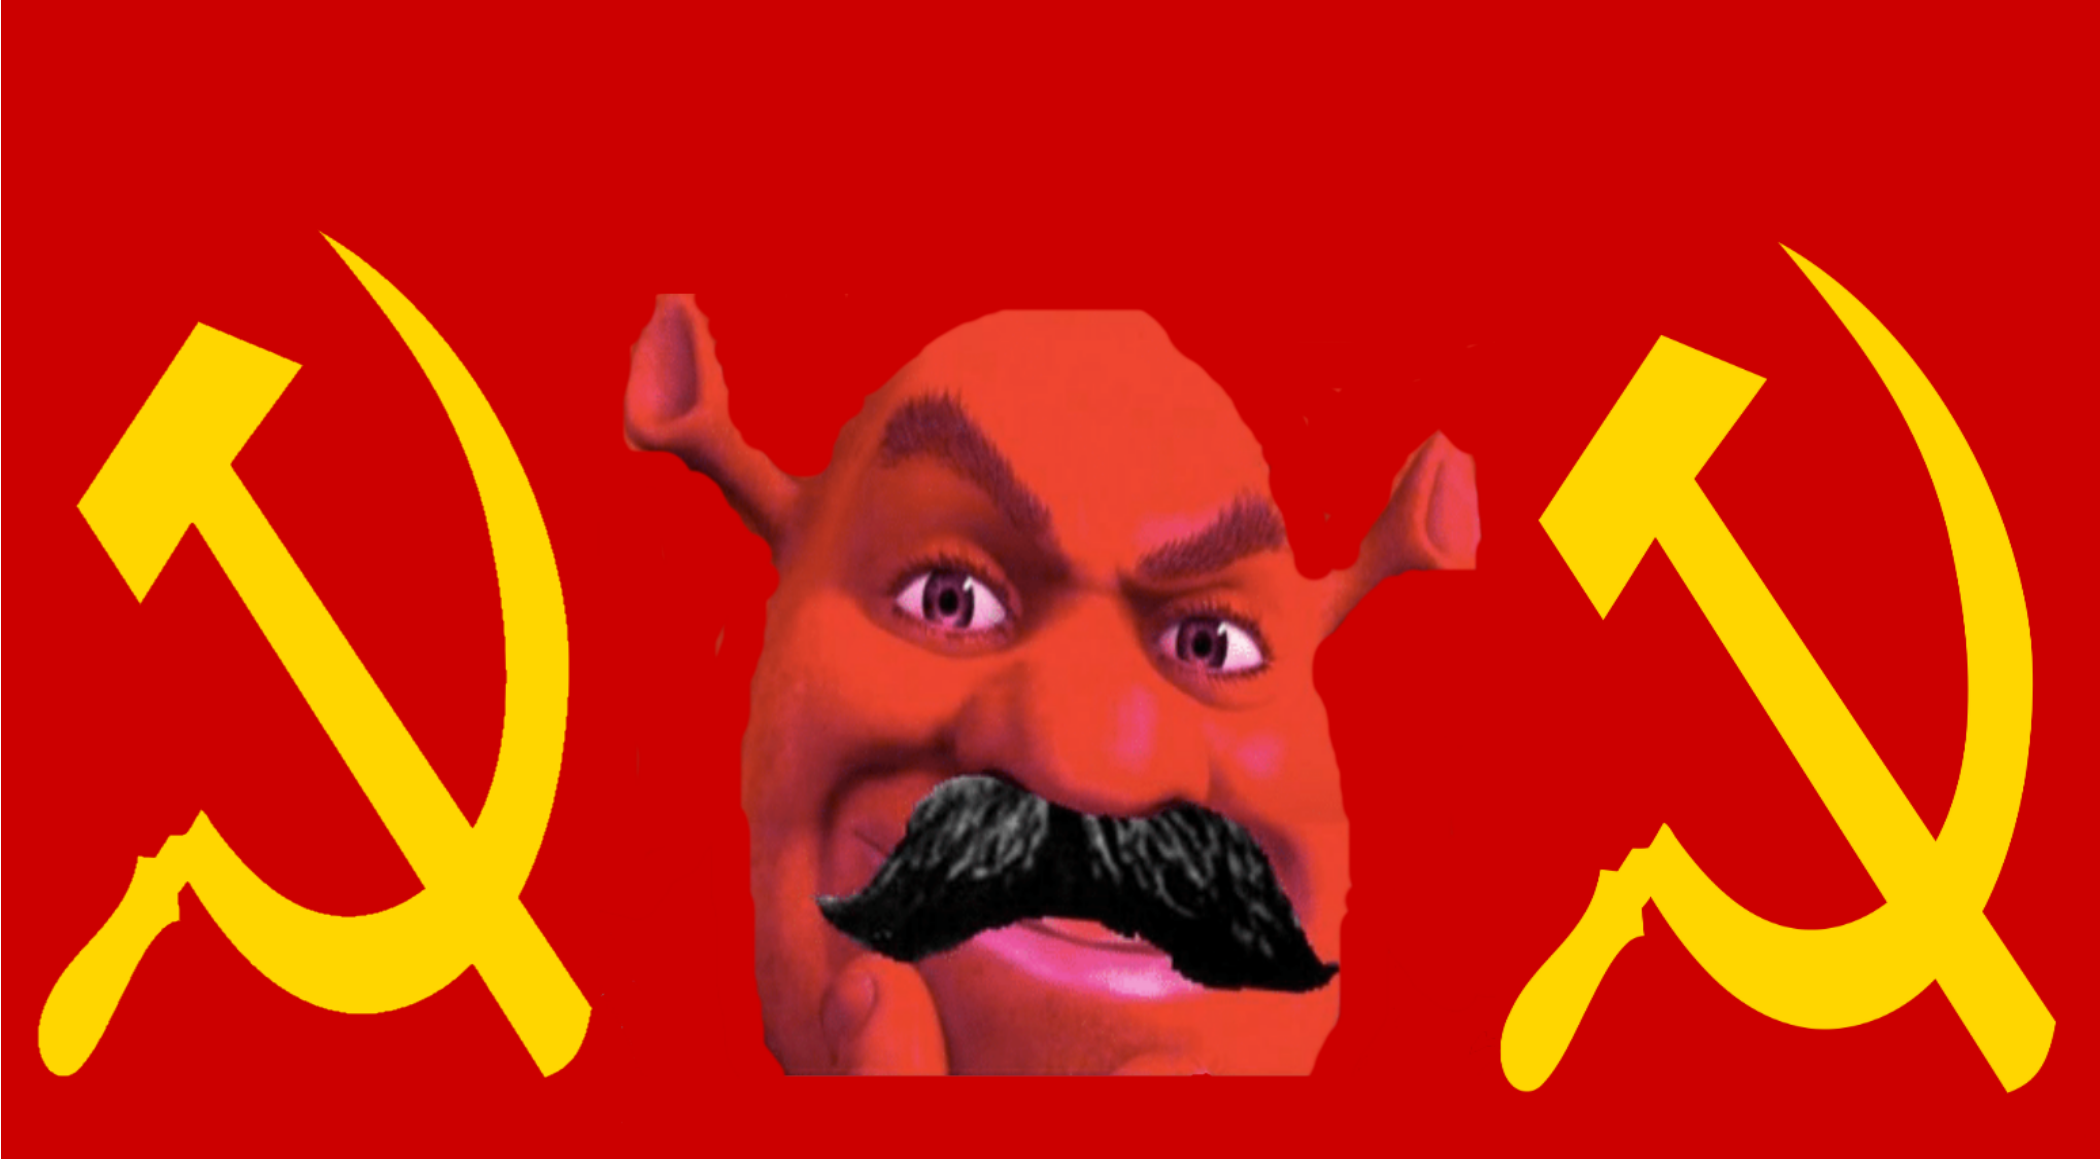 When you misspell the soviet union and instead say ''Soviet Onion"